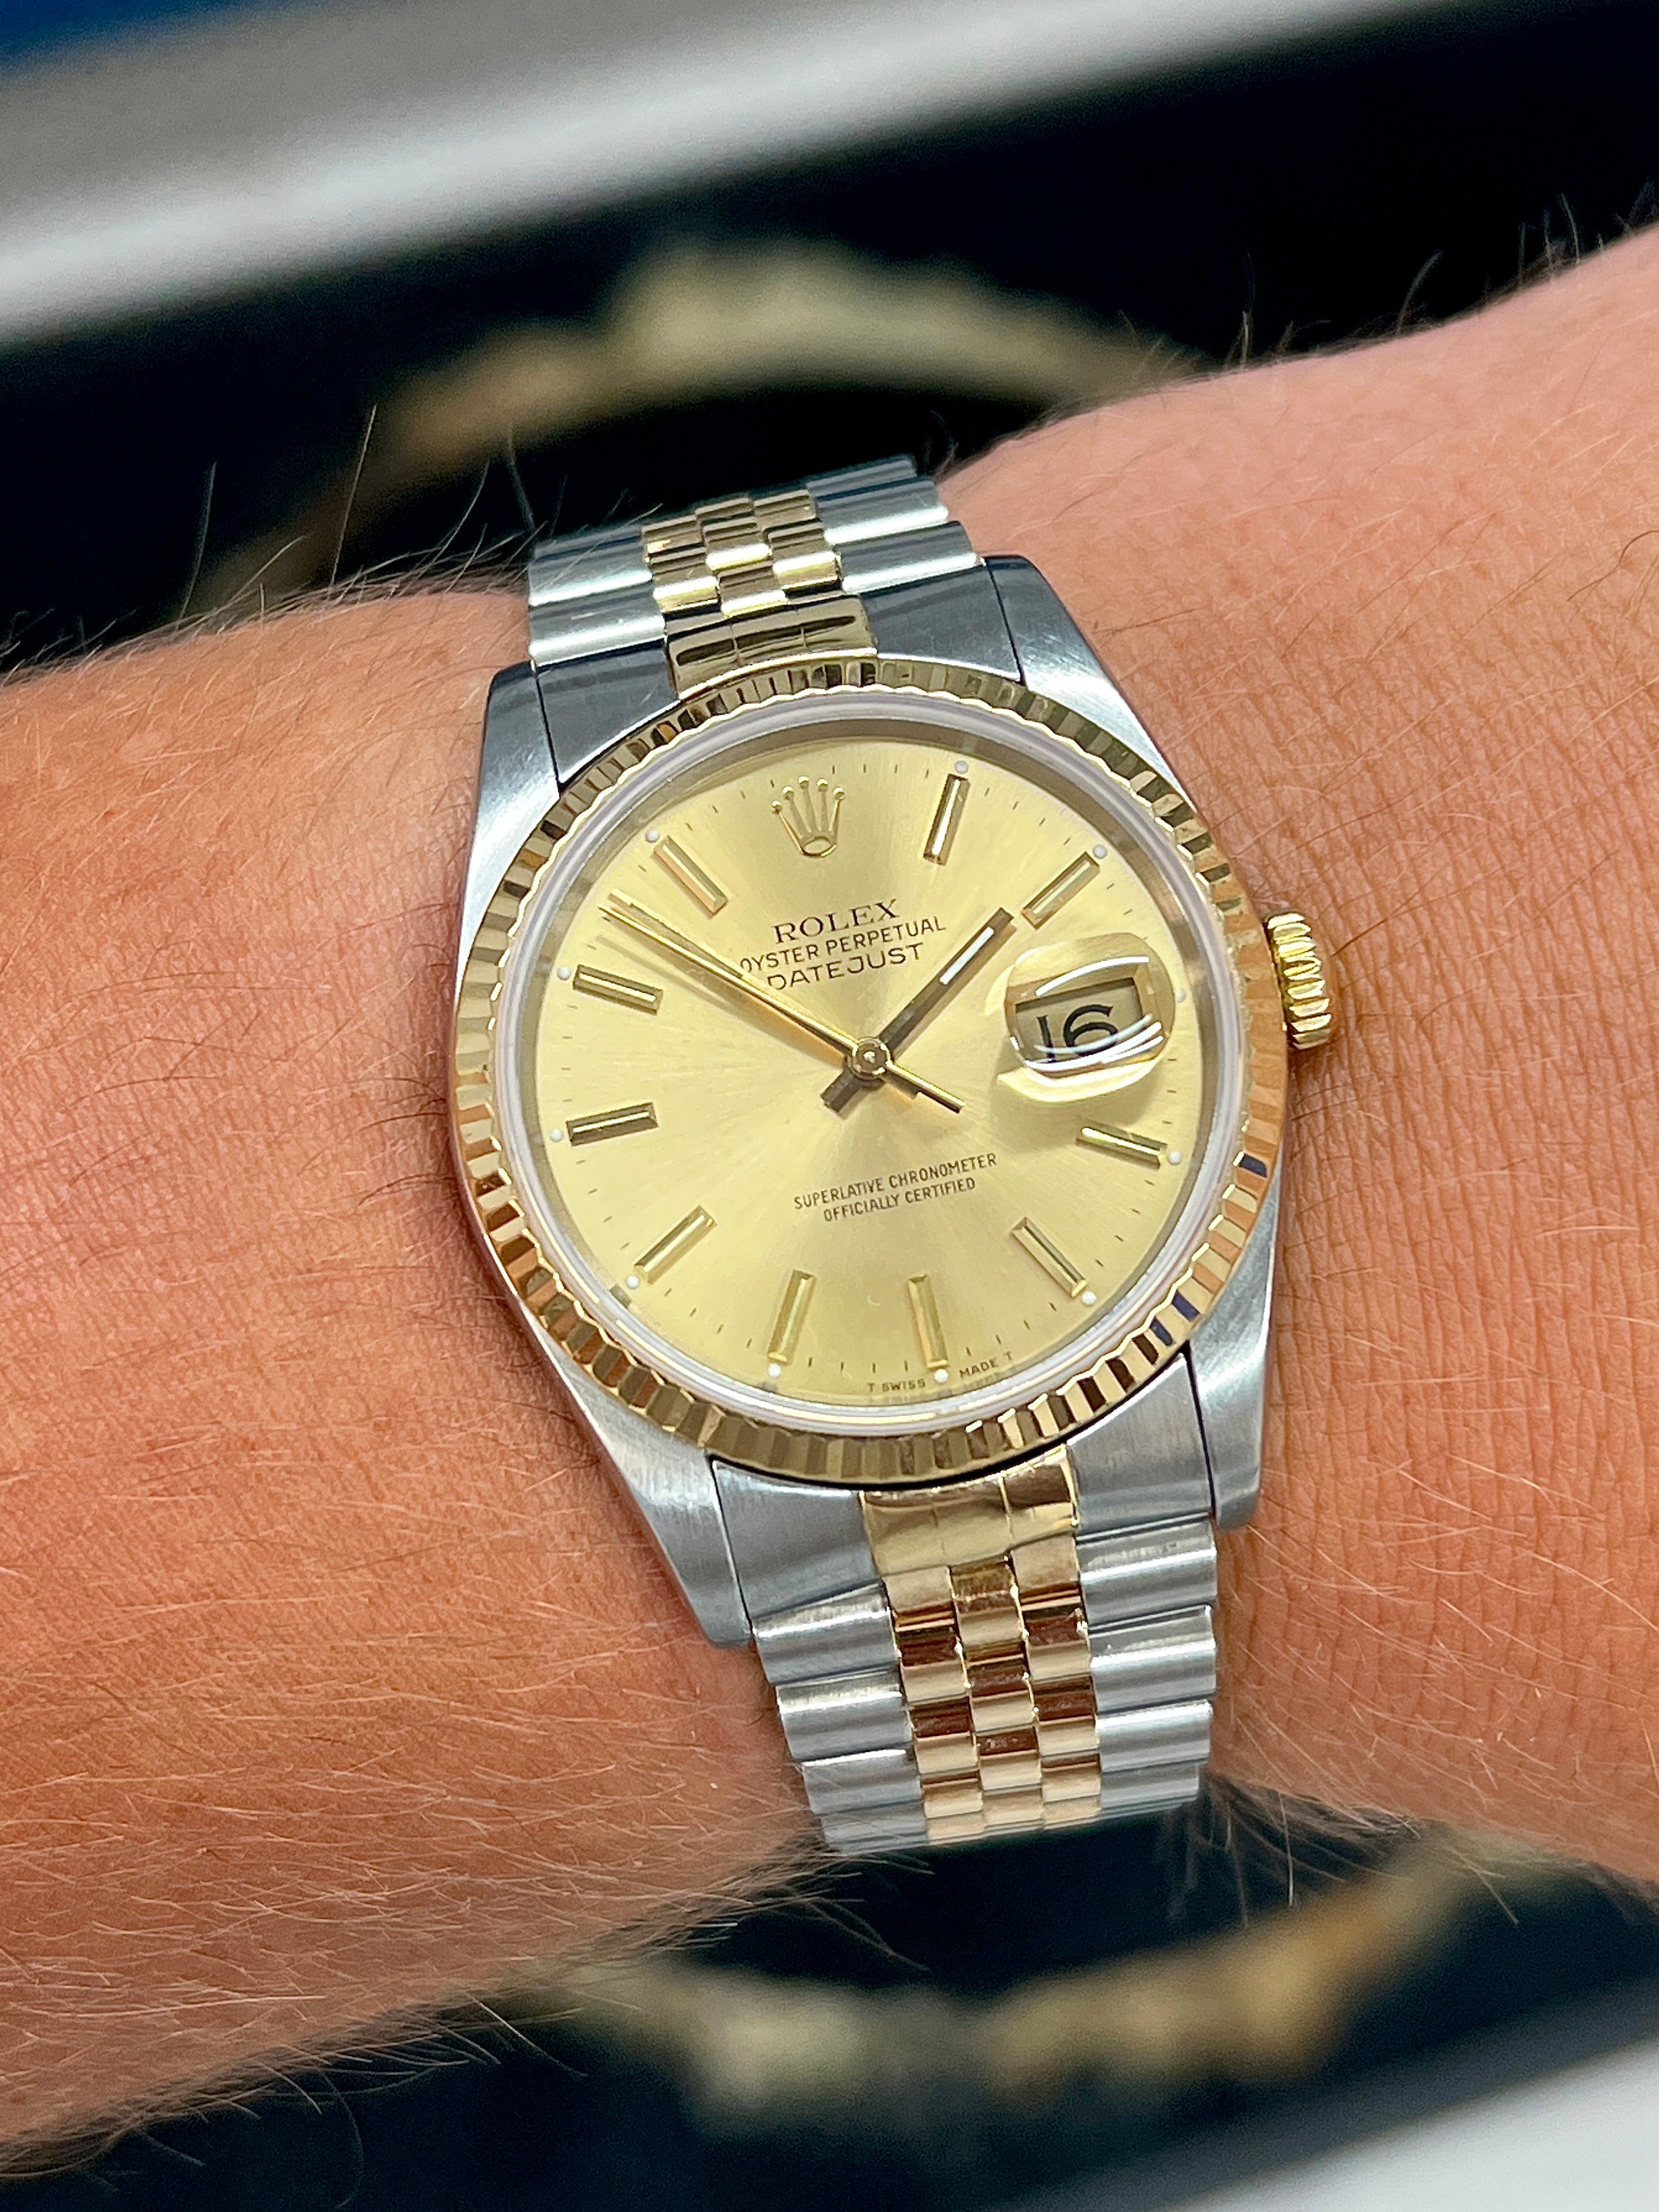 Evakuering dusin om forladelse Rolex Datejust 36mm Factory Champagne Baton Dial '16233' | Ride On Timee